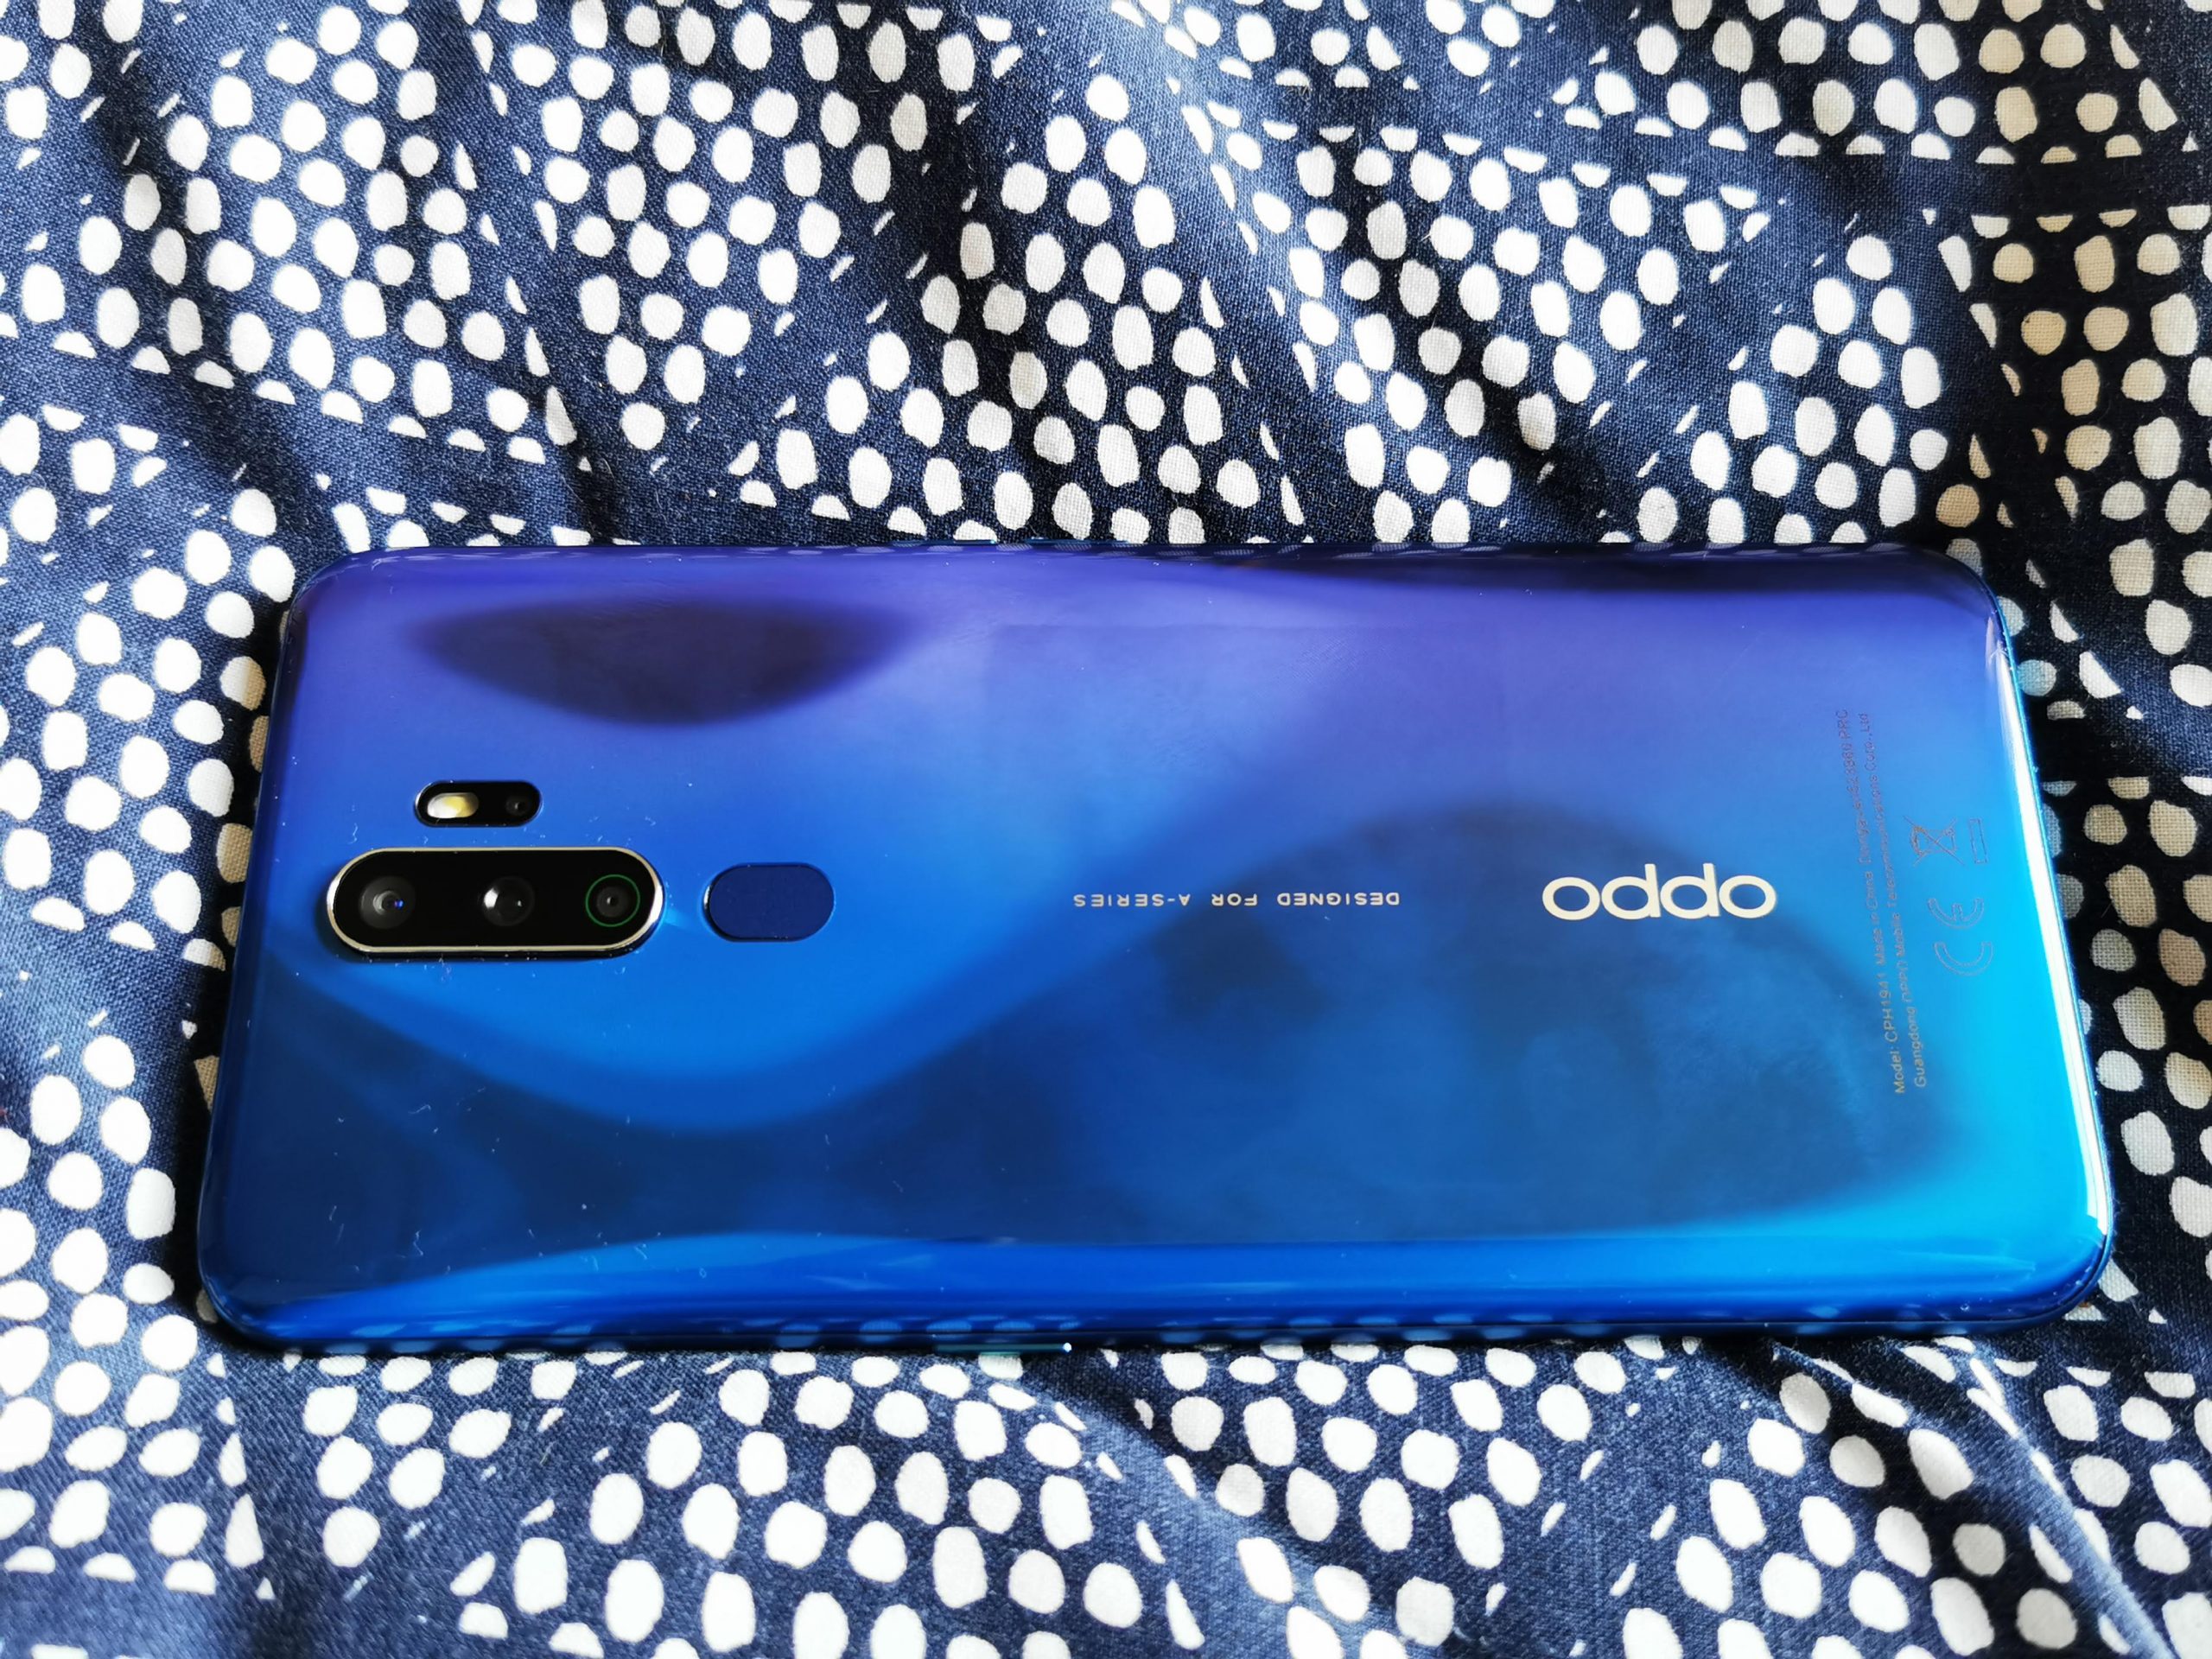 Review of the Oppo A9 2020 with a massive 5000mah battery